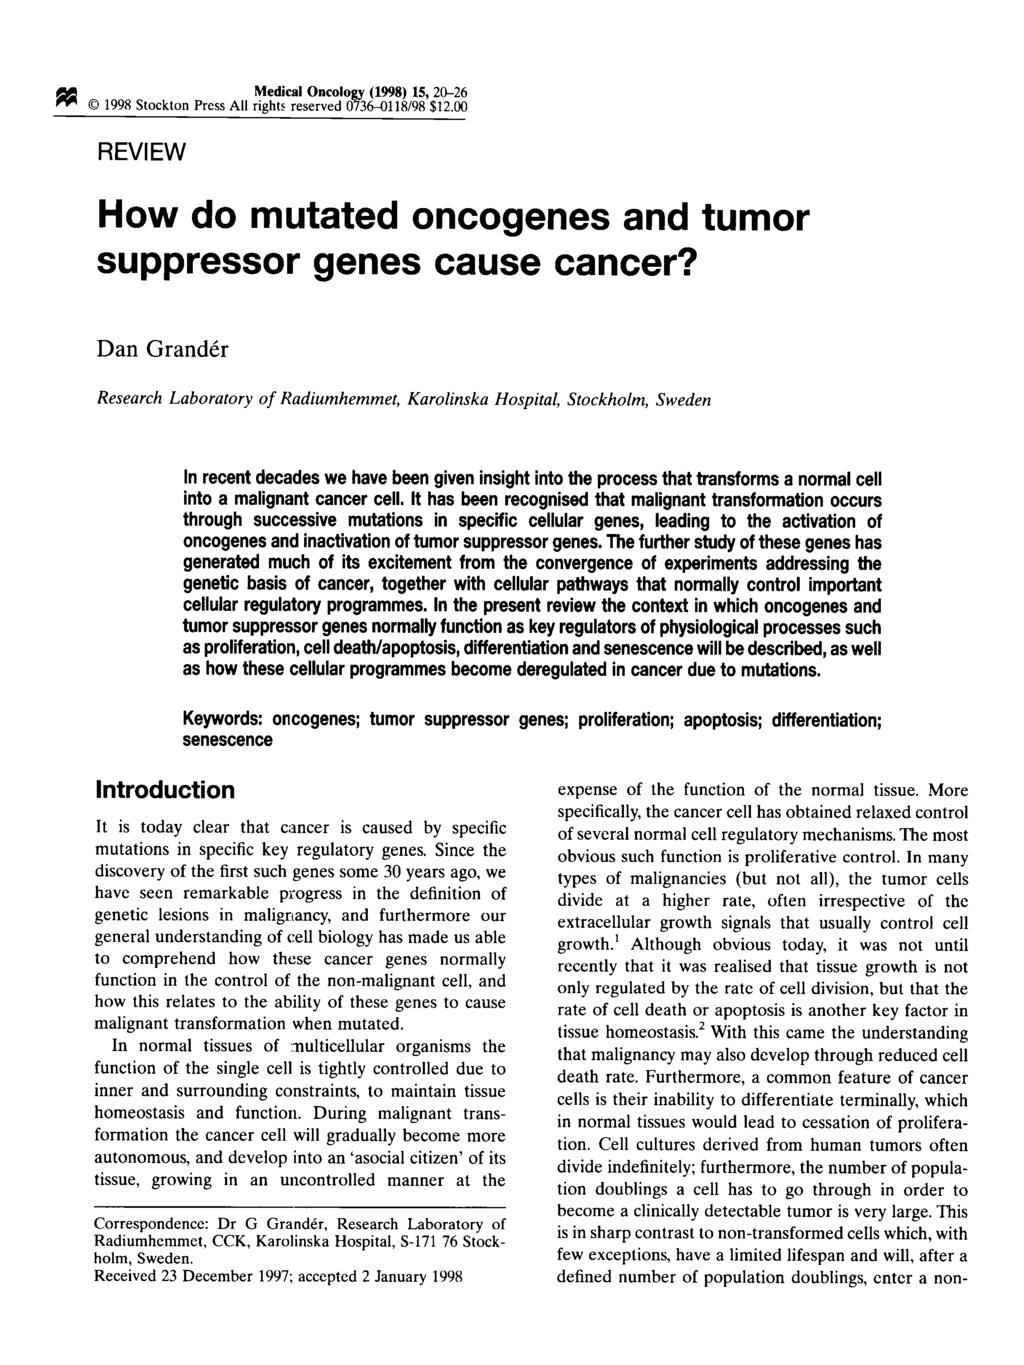 Medical Oncology (1998) 15, 20-26 9 1998 Stockton Press All rights reserved 0736-0118/98 $12.00 REVIEW How do mutated oncogenes and tumor suppressor genes cause cancer?